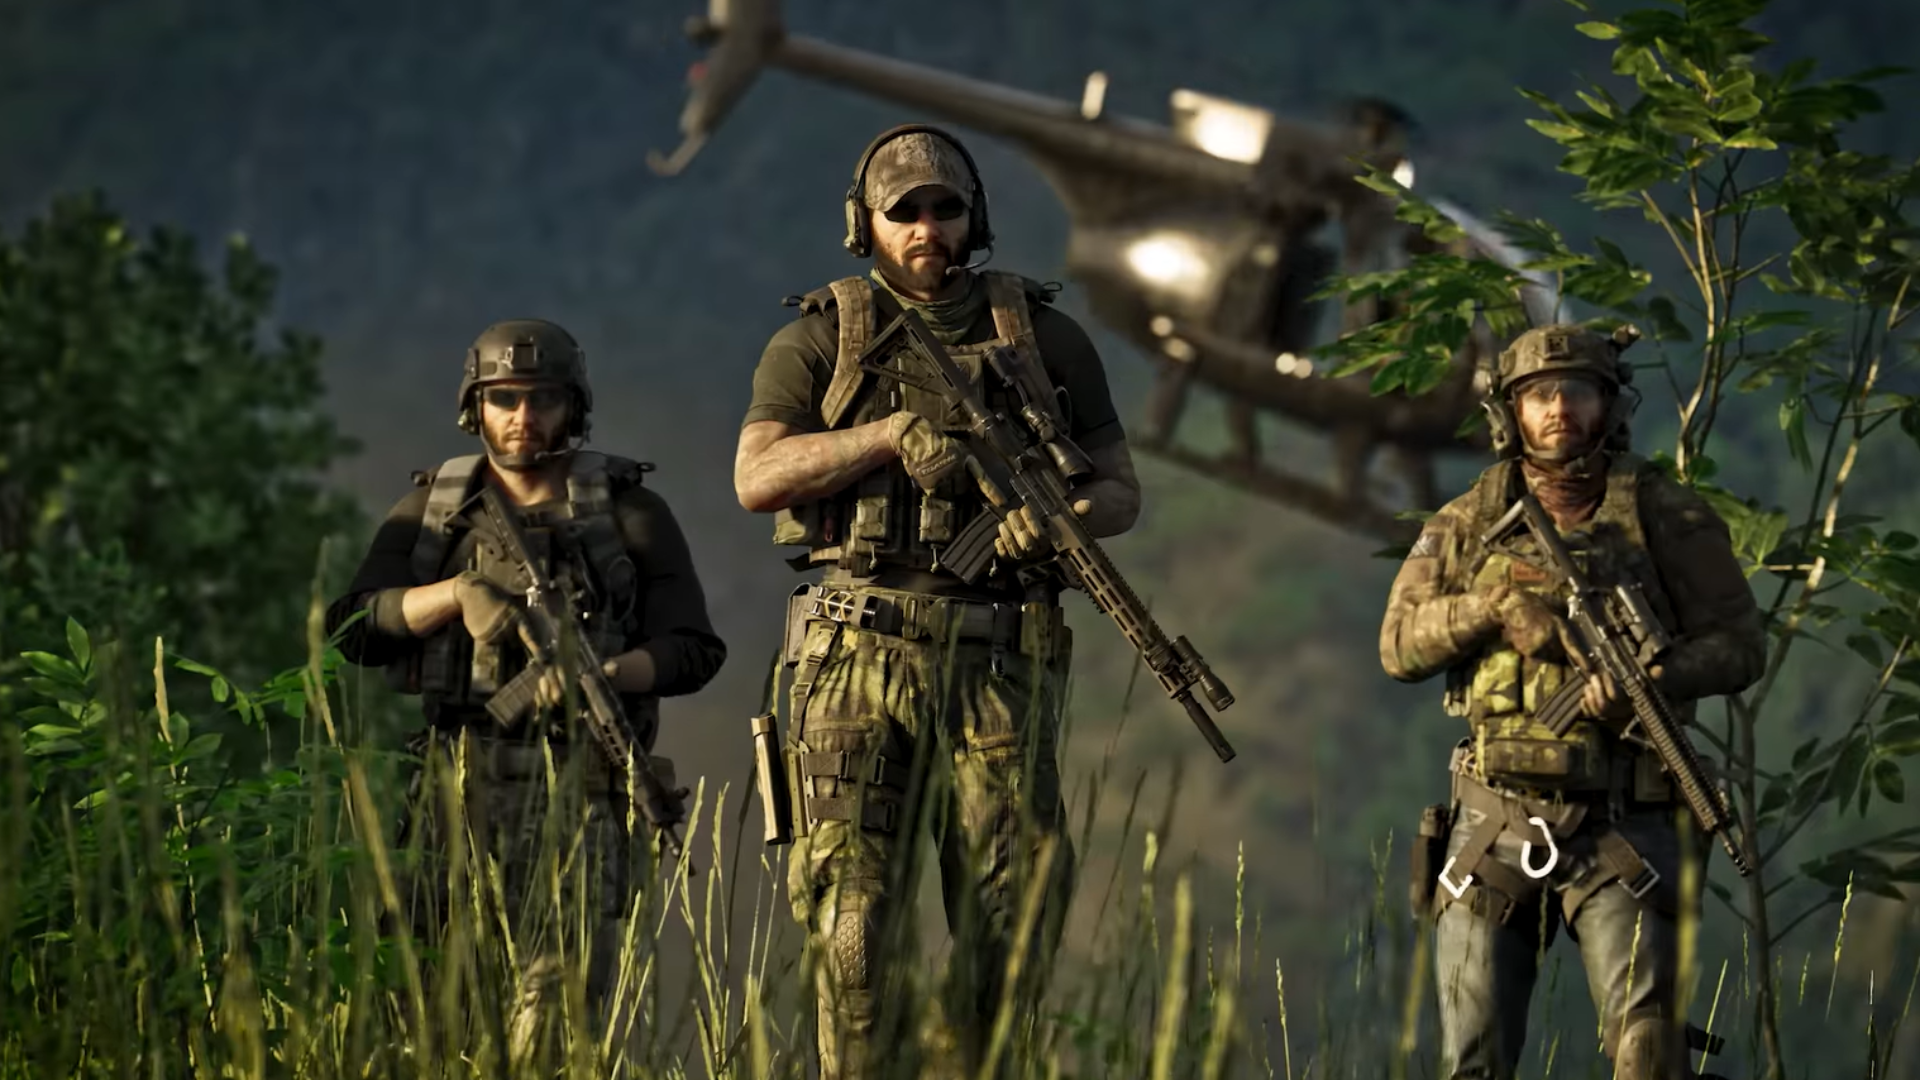 Gray Zone Warfare tops Steam's best sellers partly thanks to disgruntled Tarkov players: 'at least it doesn't cost 250 dollars'